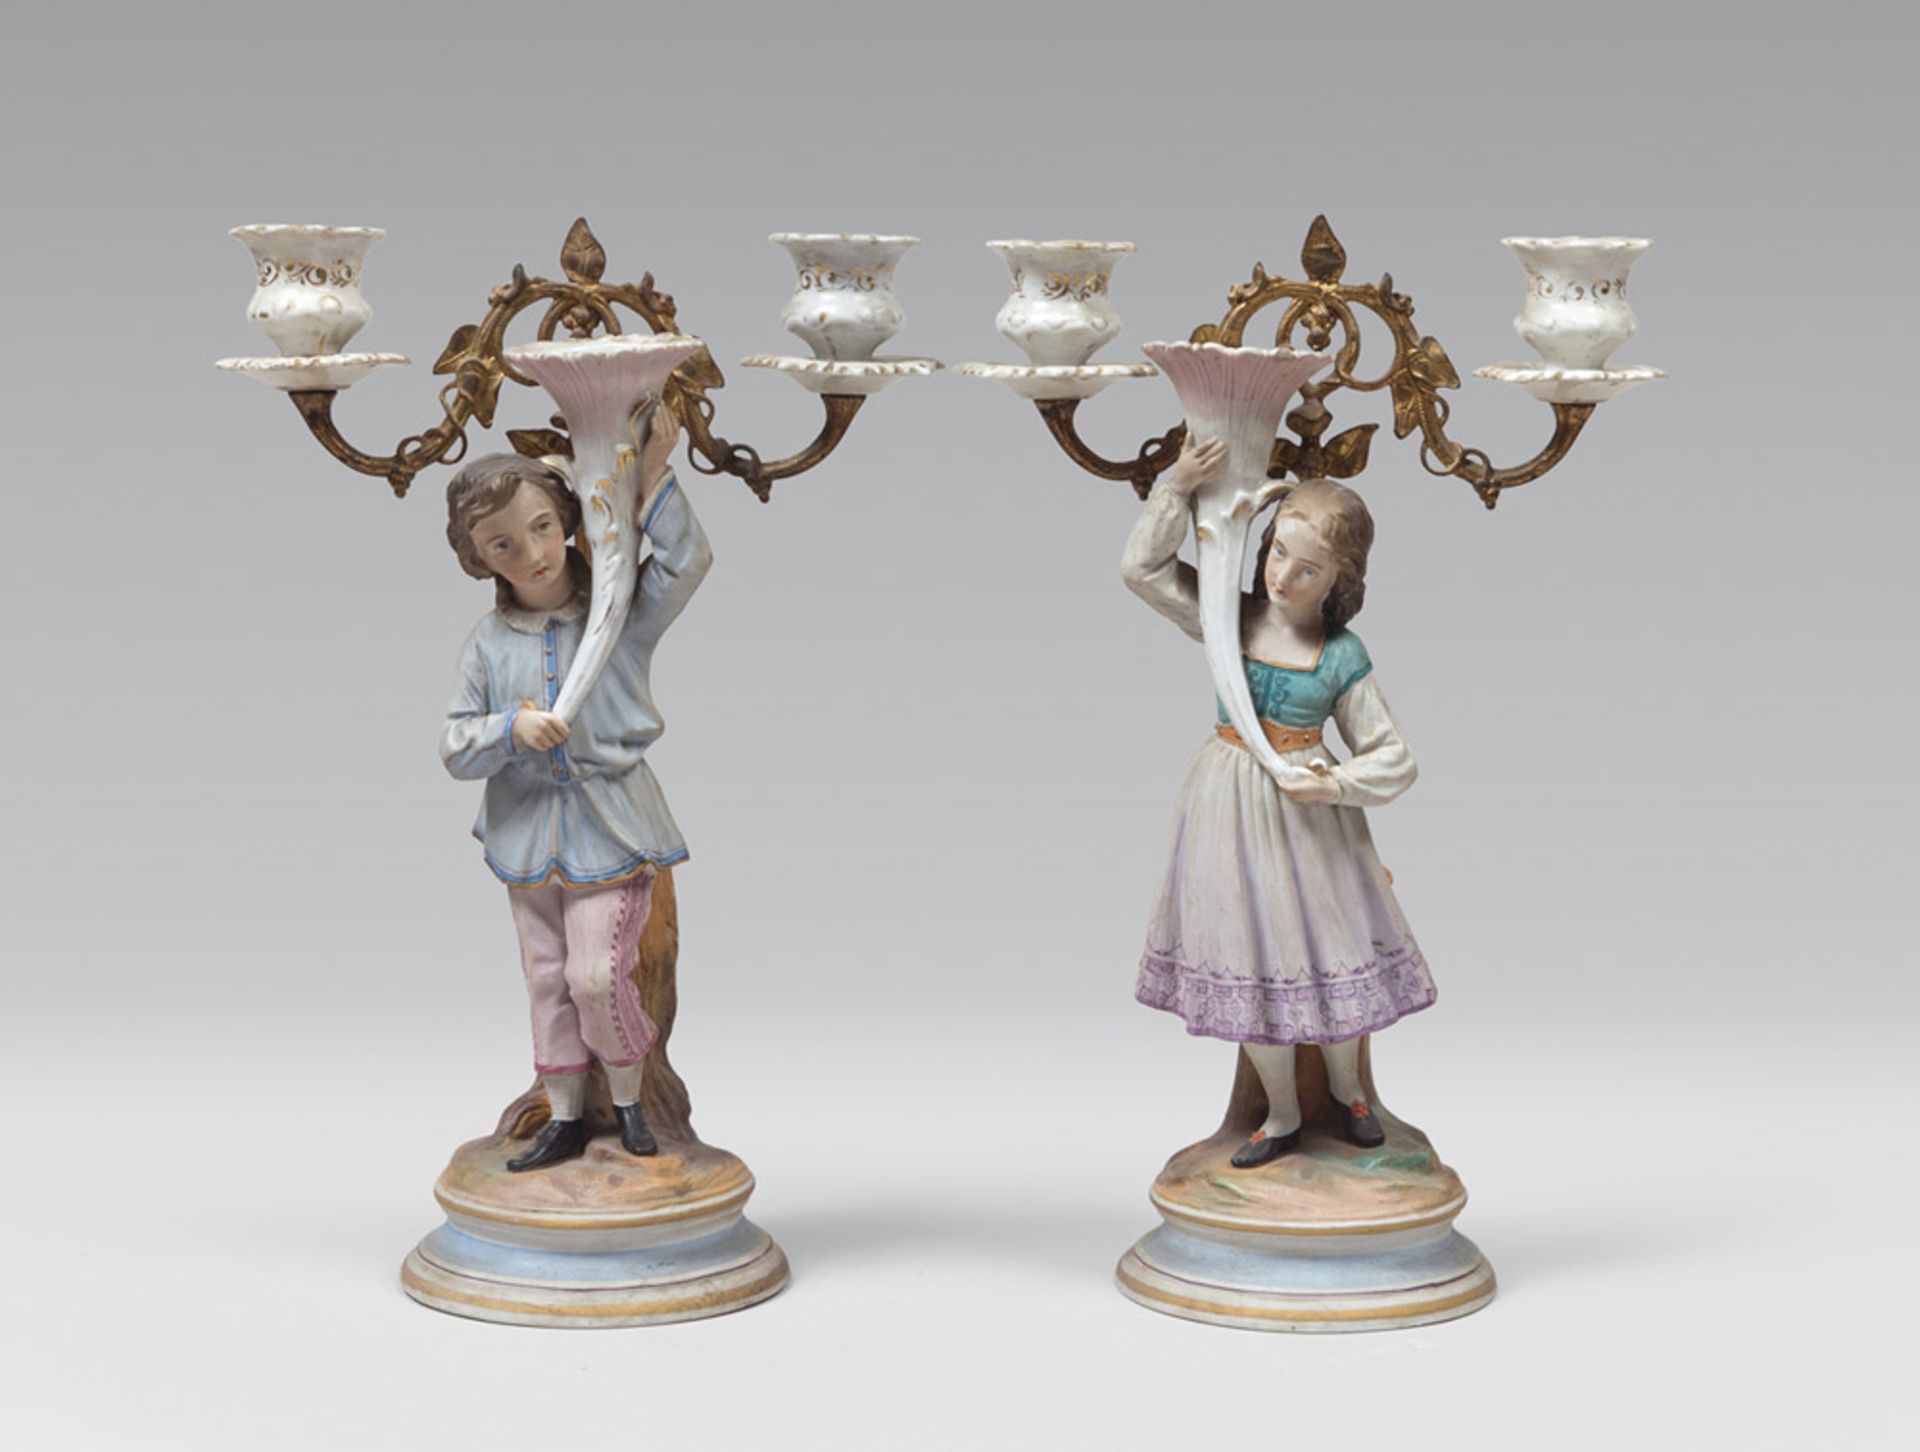 A PAIR OF BISCUIT CANDELABRA, FRANCE LATE 19TH CENTURY